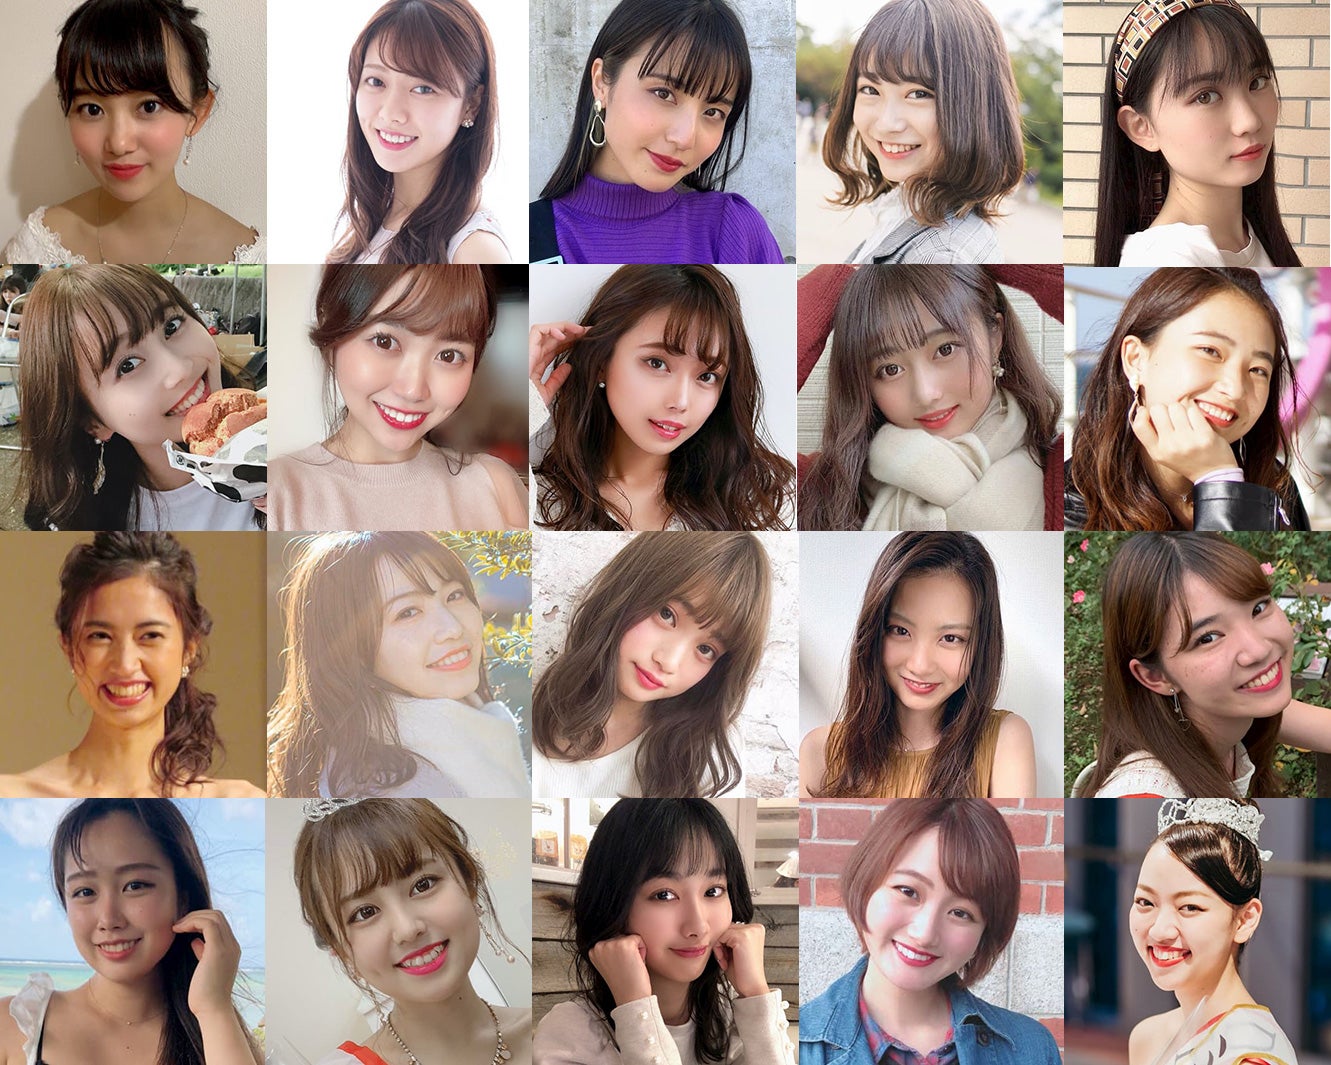 「MISS OF MISS CAMPUS QUEEN CONTEST 2020」ファイナリスト（提供写真）